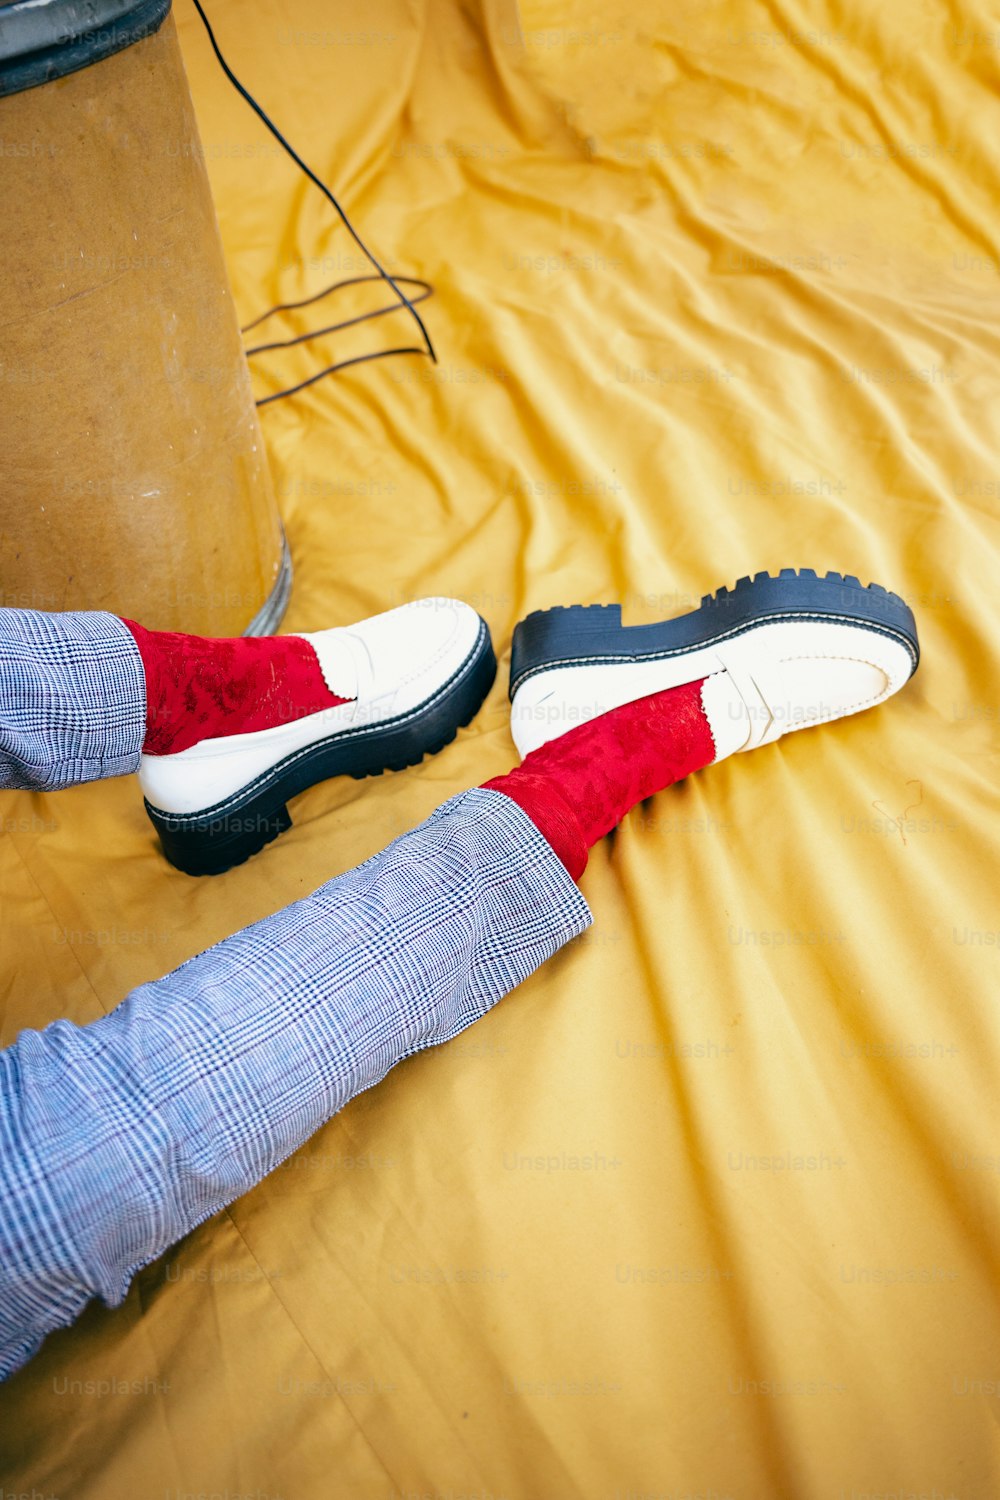 a person laying on a bed with red and white shoes